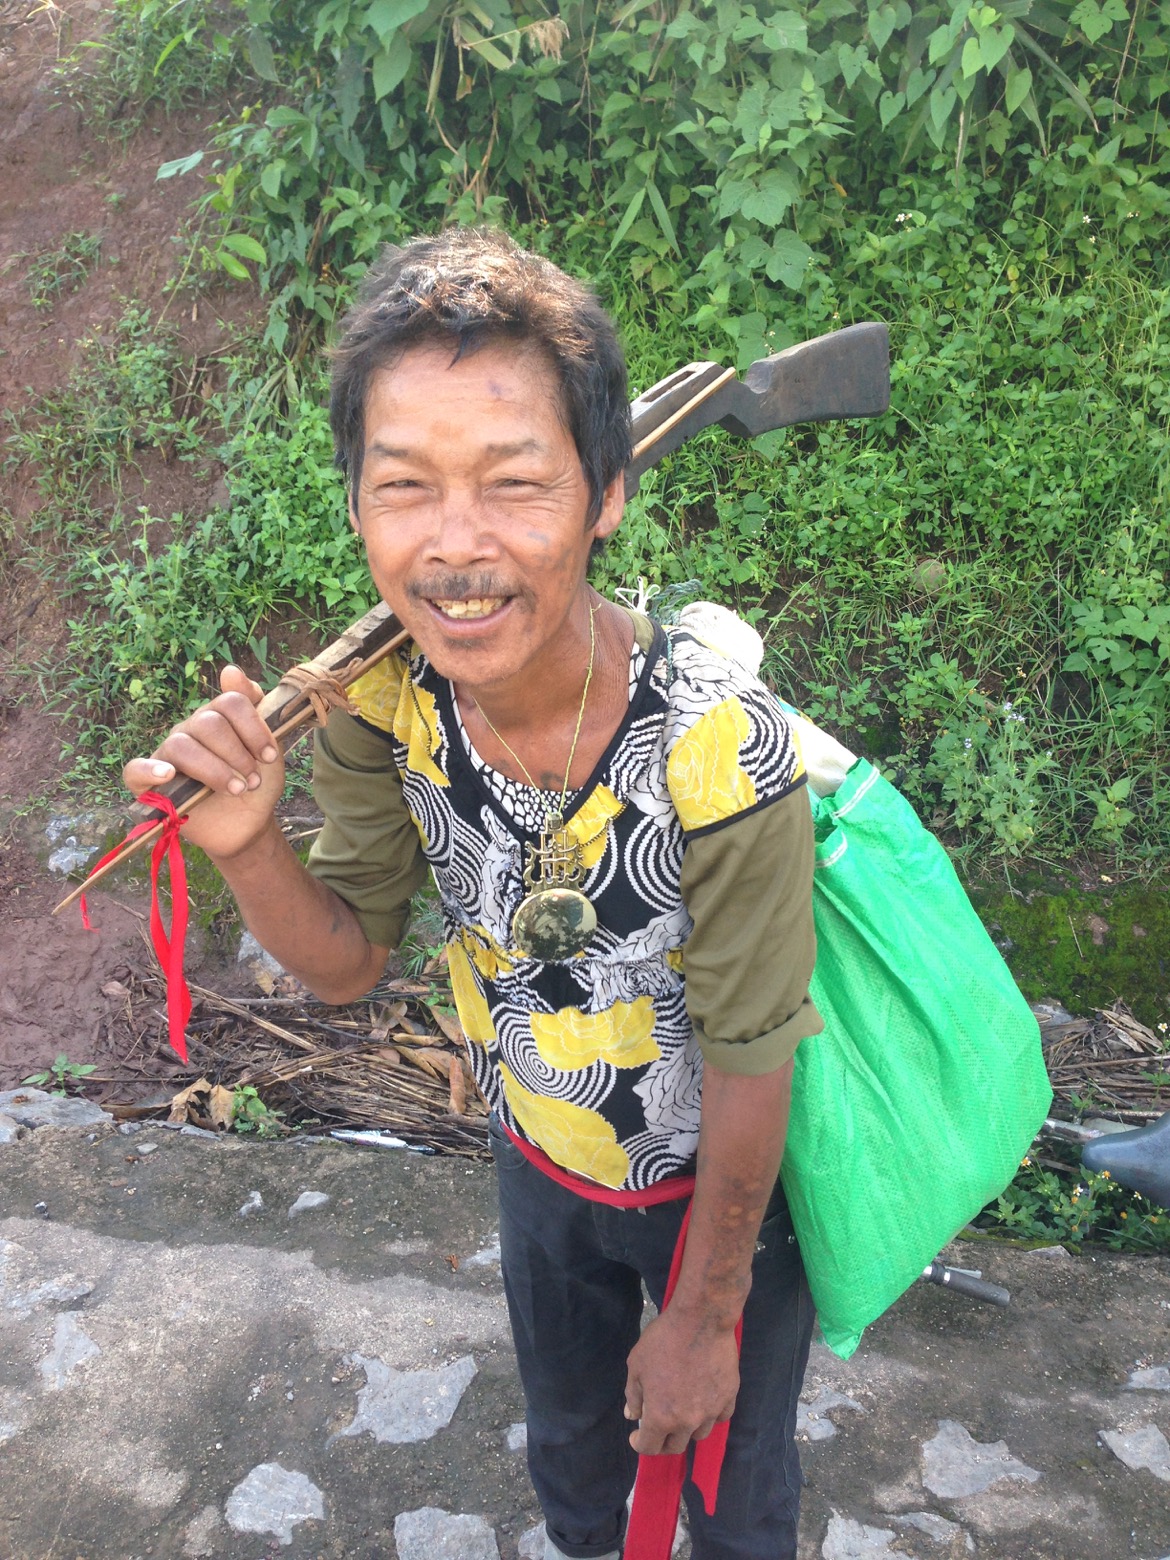  I met this Vietnamese native on the street and had a chat with him. 